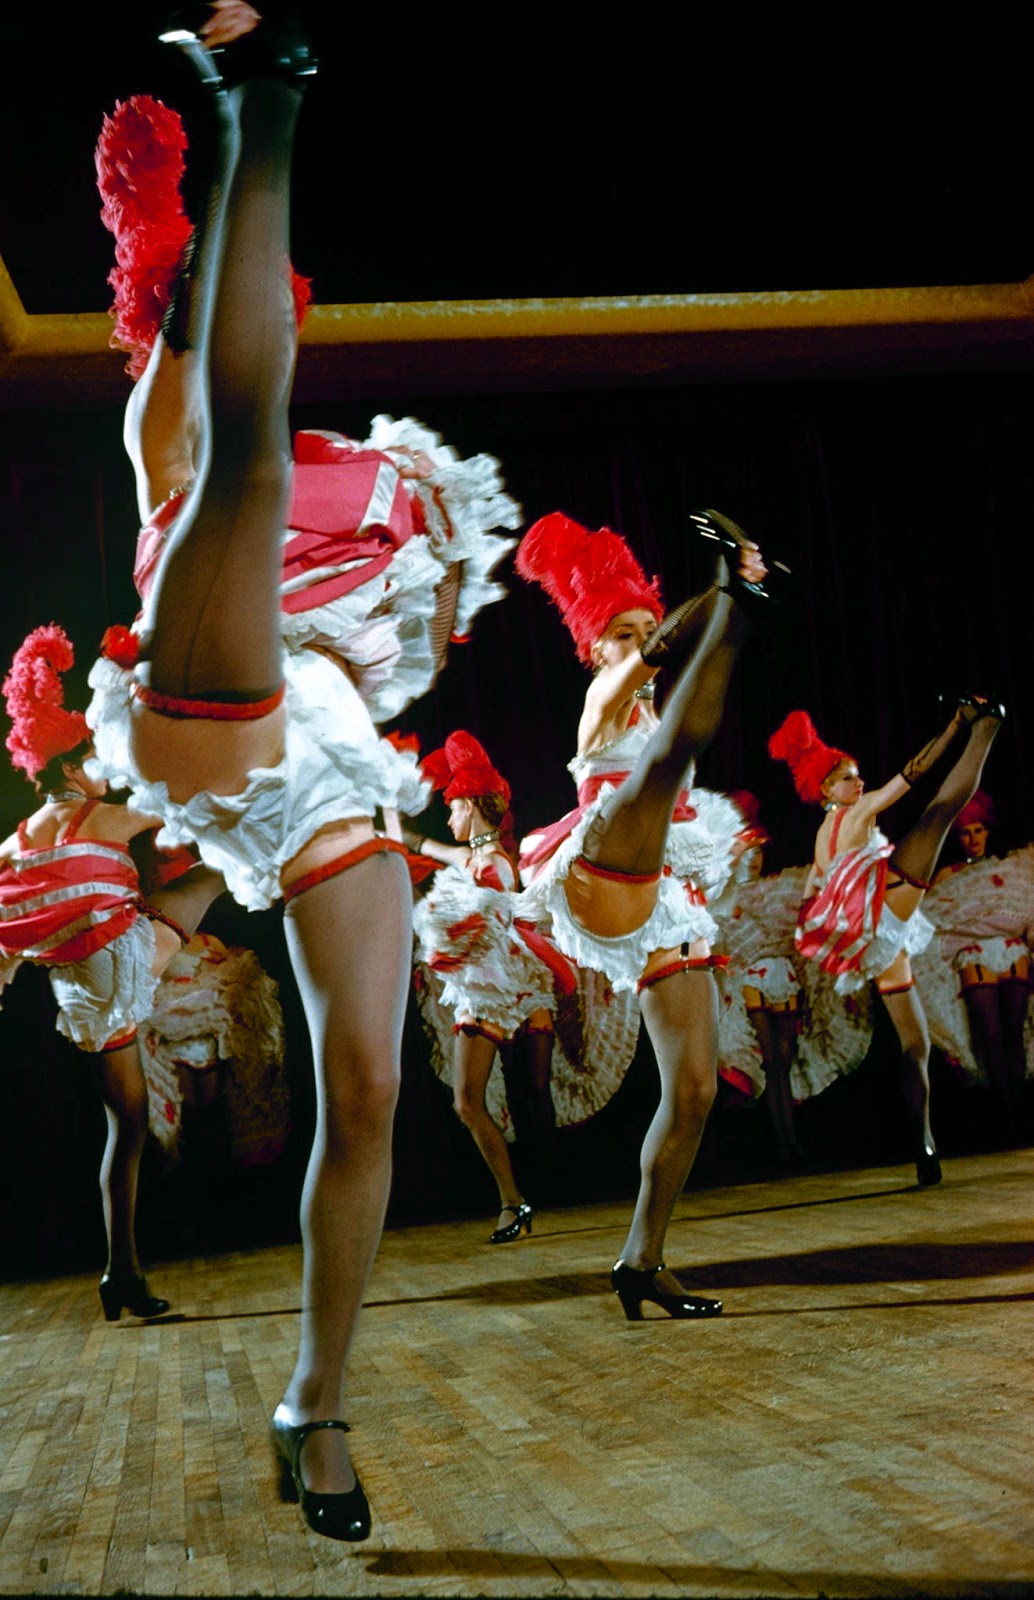 Amazing Vintage Color Photos Of Cabarets Dancers At The Moulin Rouge